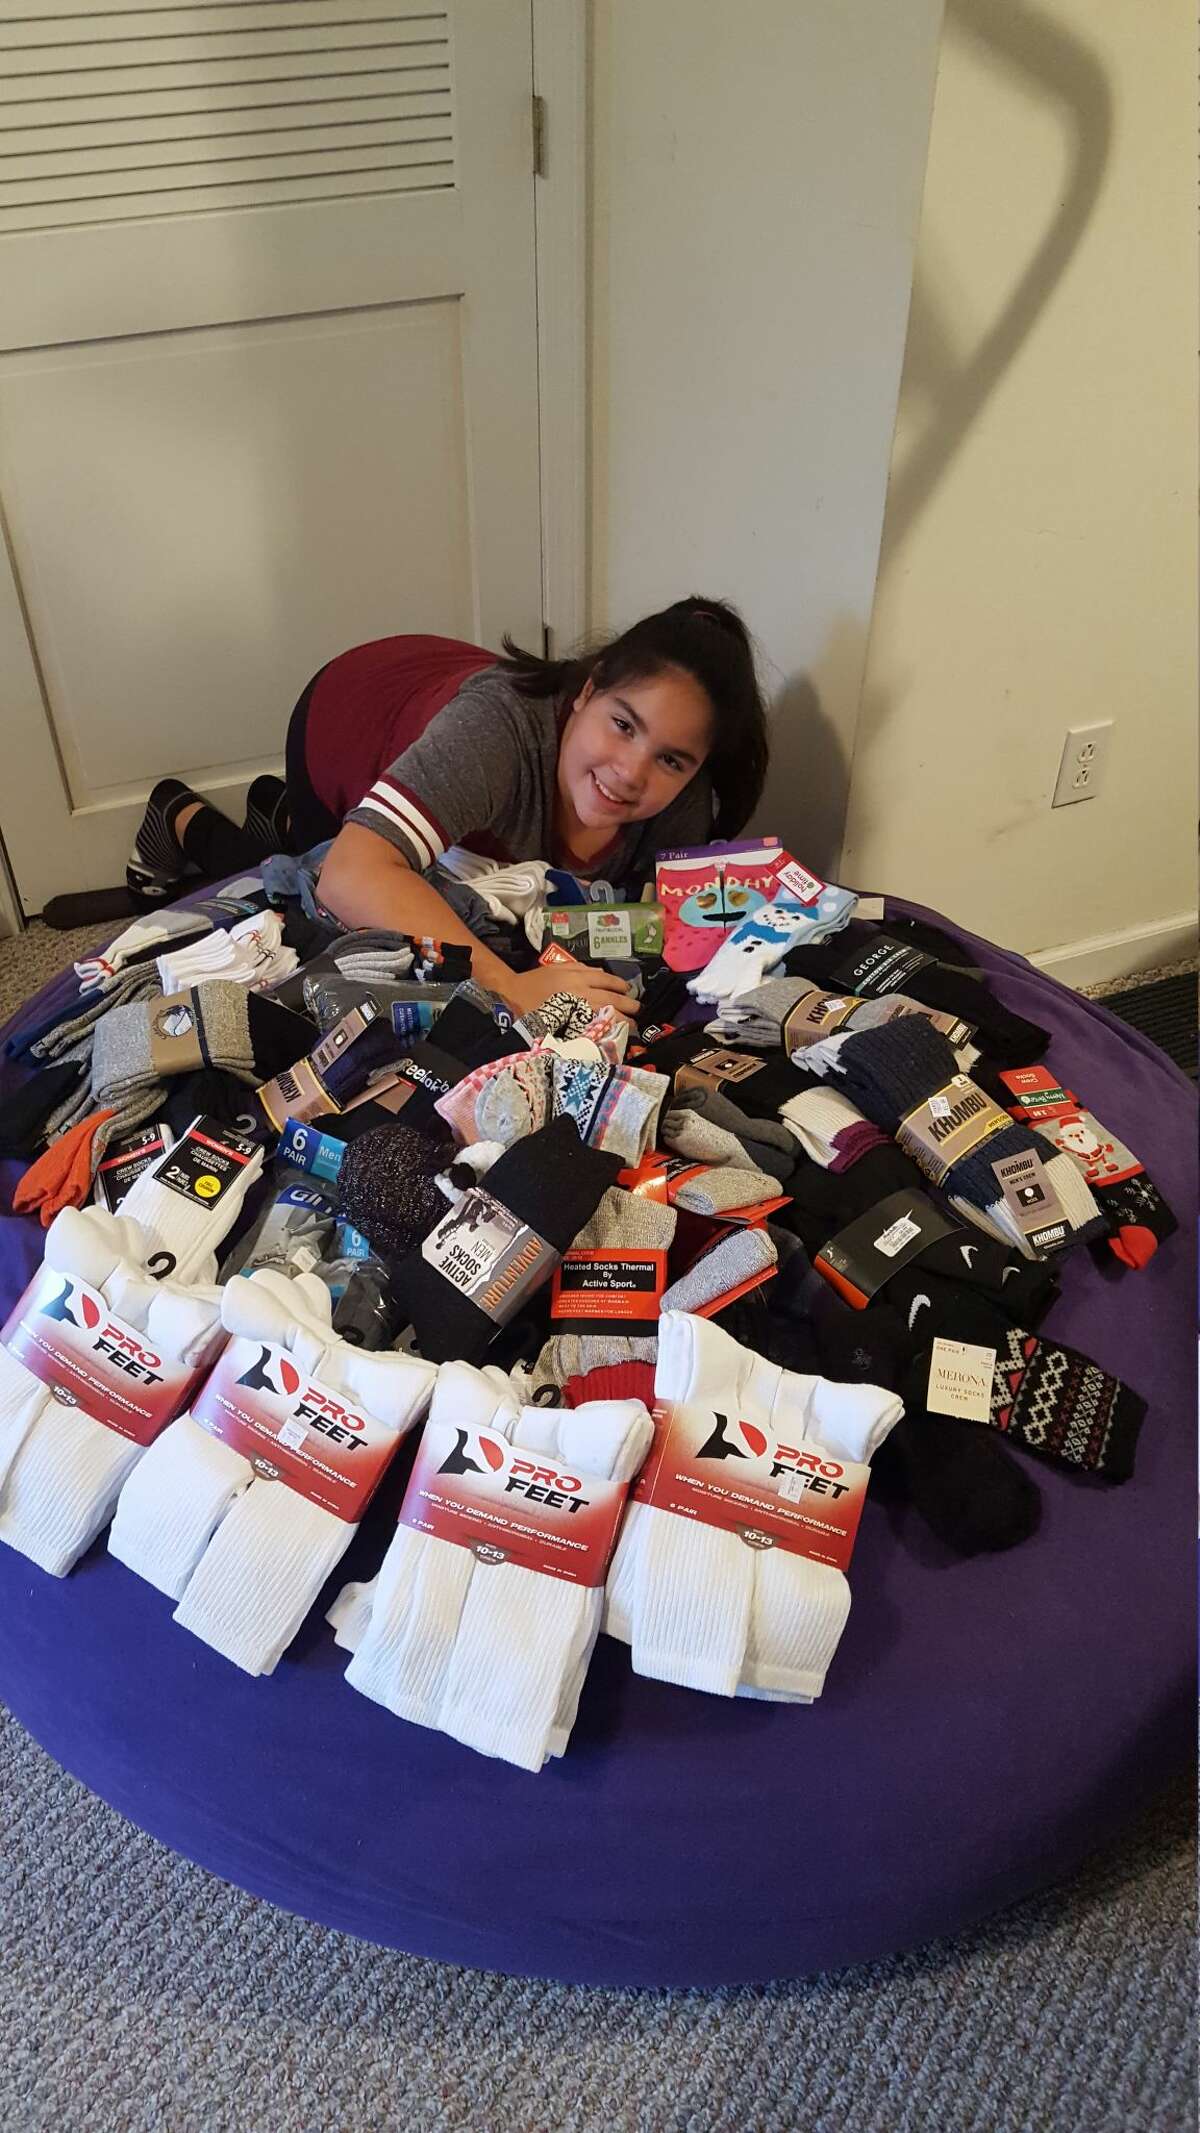 Eleven-year-old Seymour Middle School student Adelina "Lulu" Barreira collected 4,147 pairs of sockss to donate to local charities through her project, "Lulu's Socktober Fest."